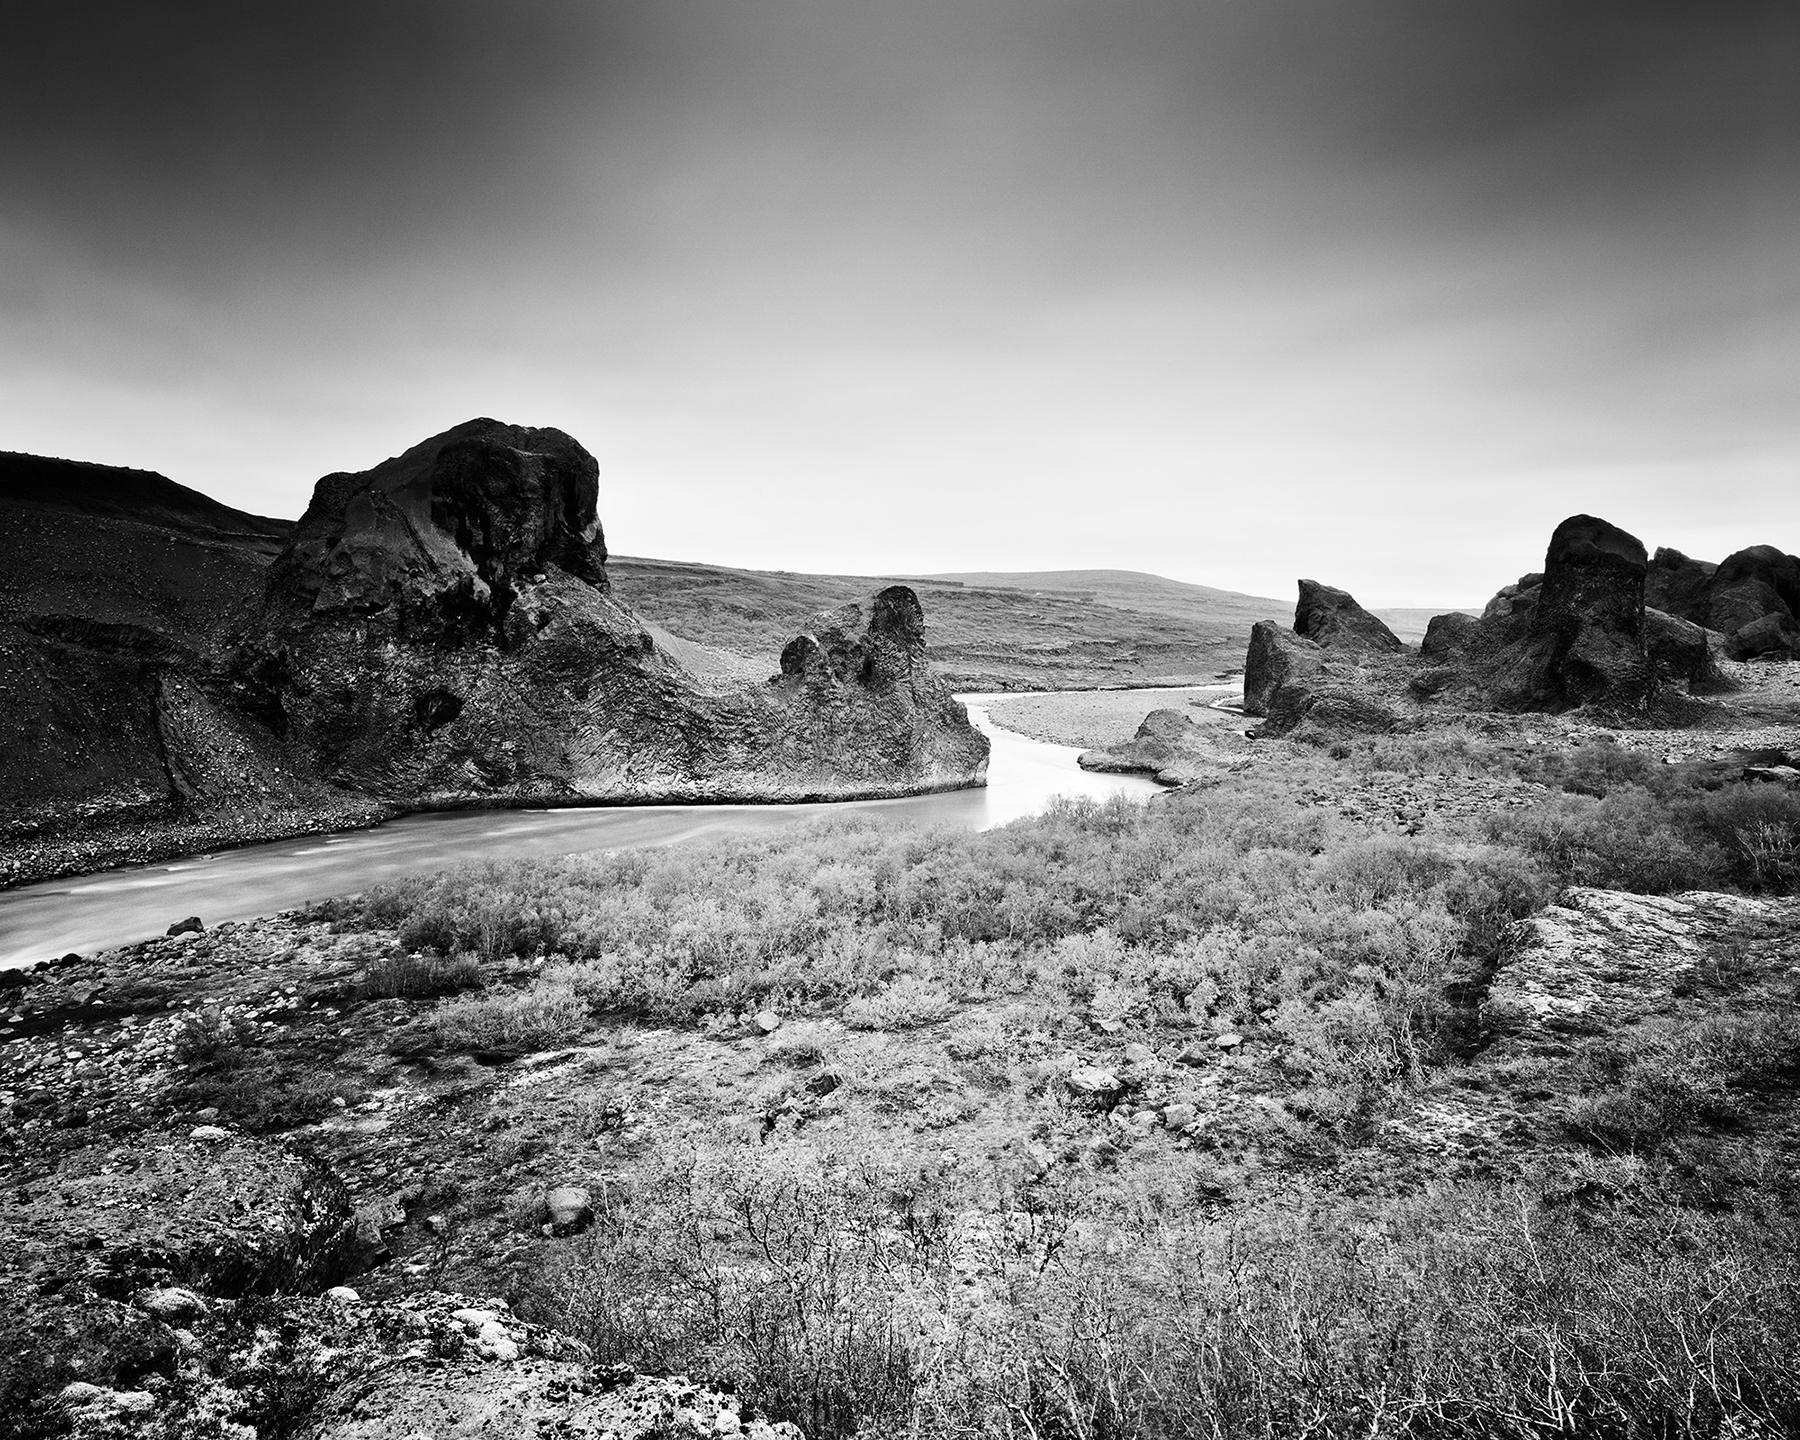 Follow Rivers, Iceland, black and white long exposure photography, landscape